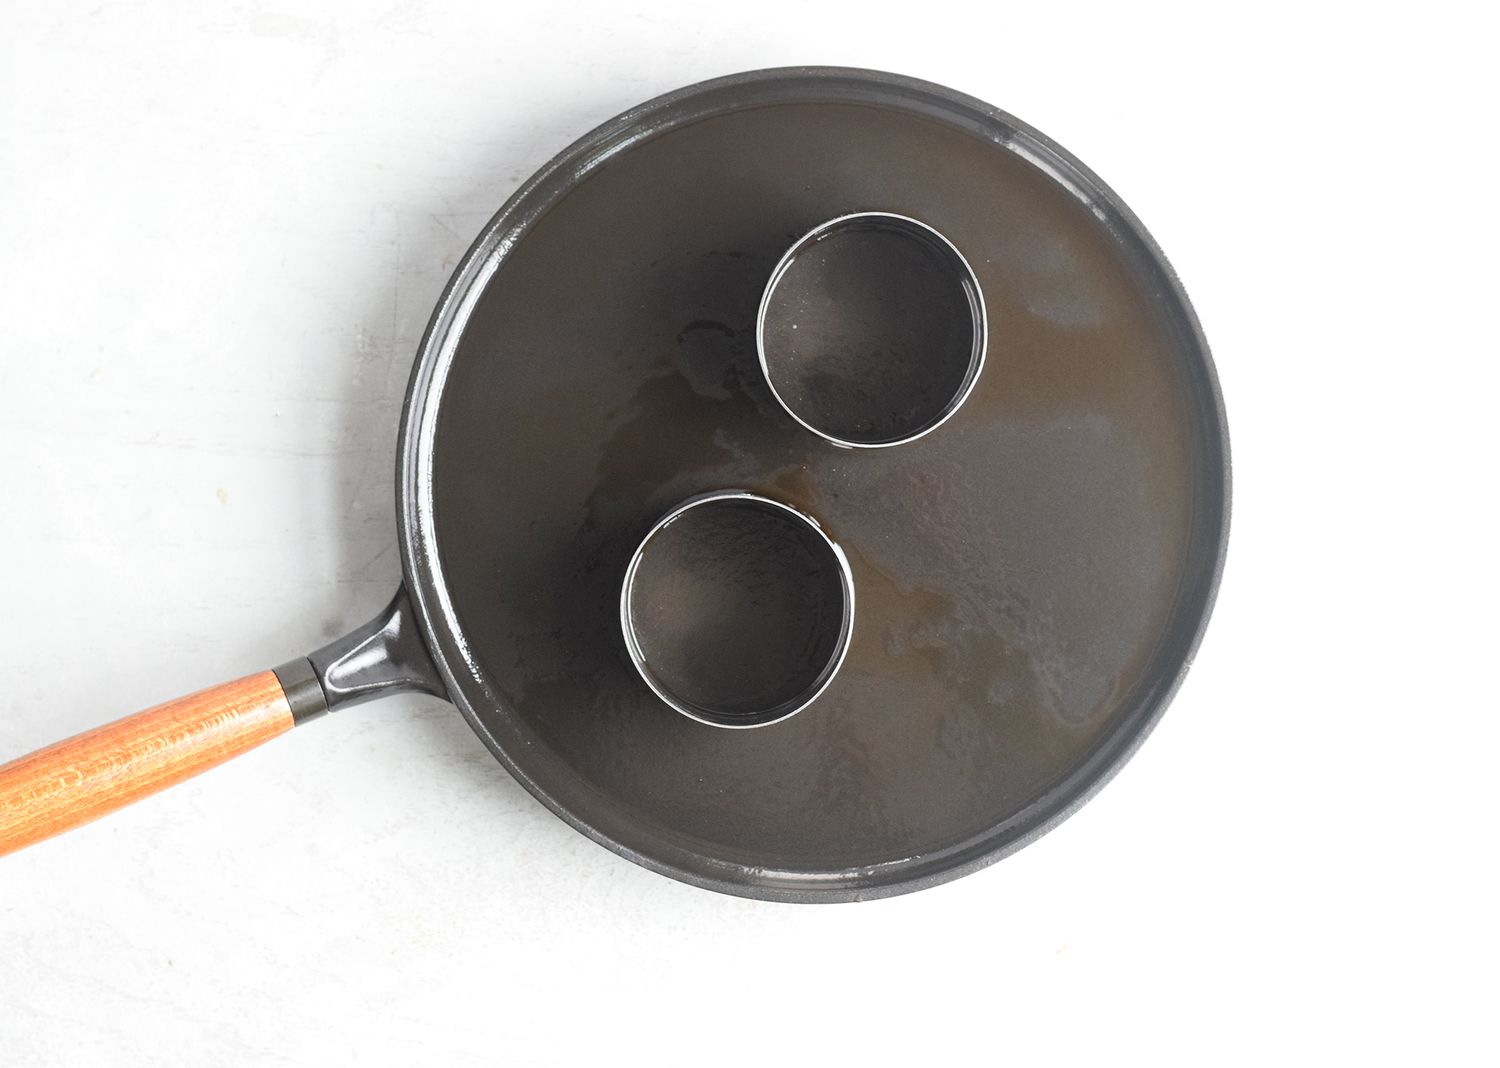 Skillet with pastry molds on top